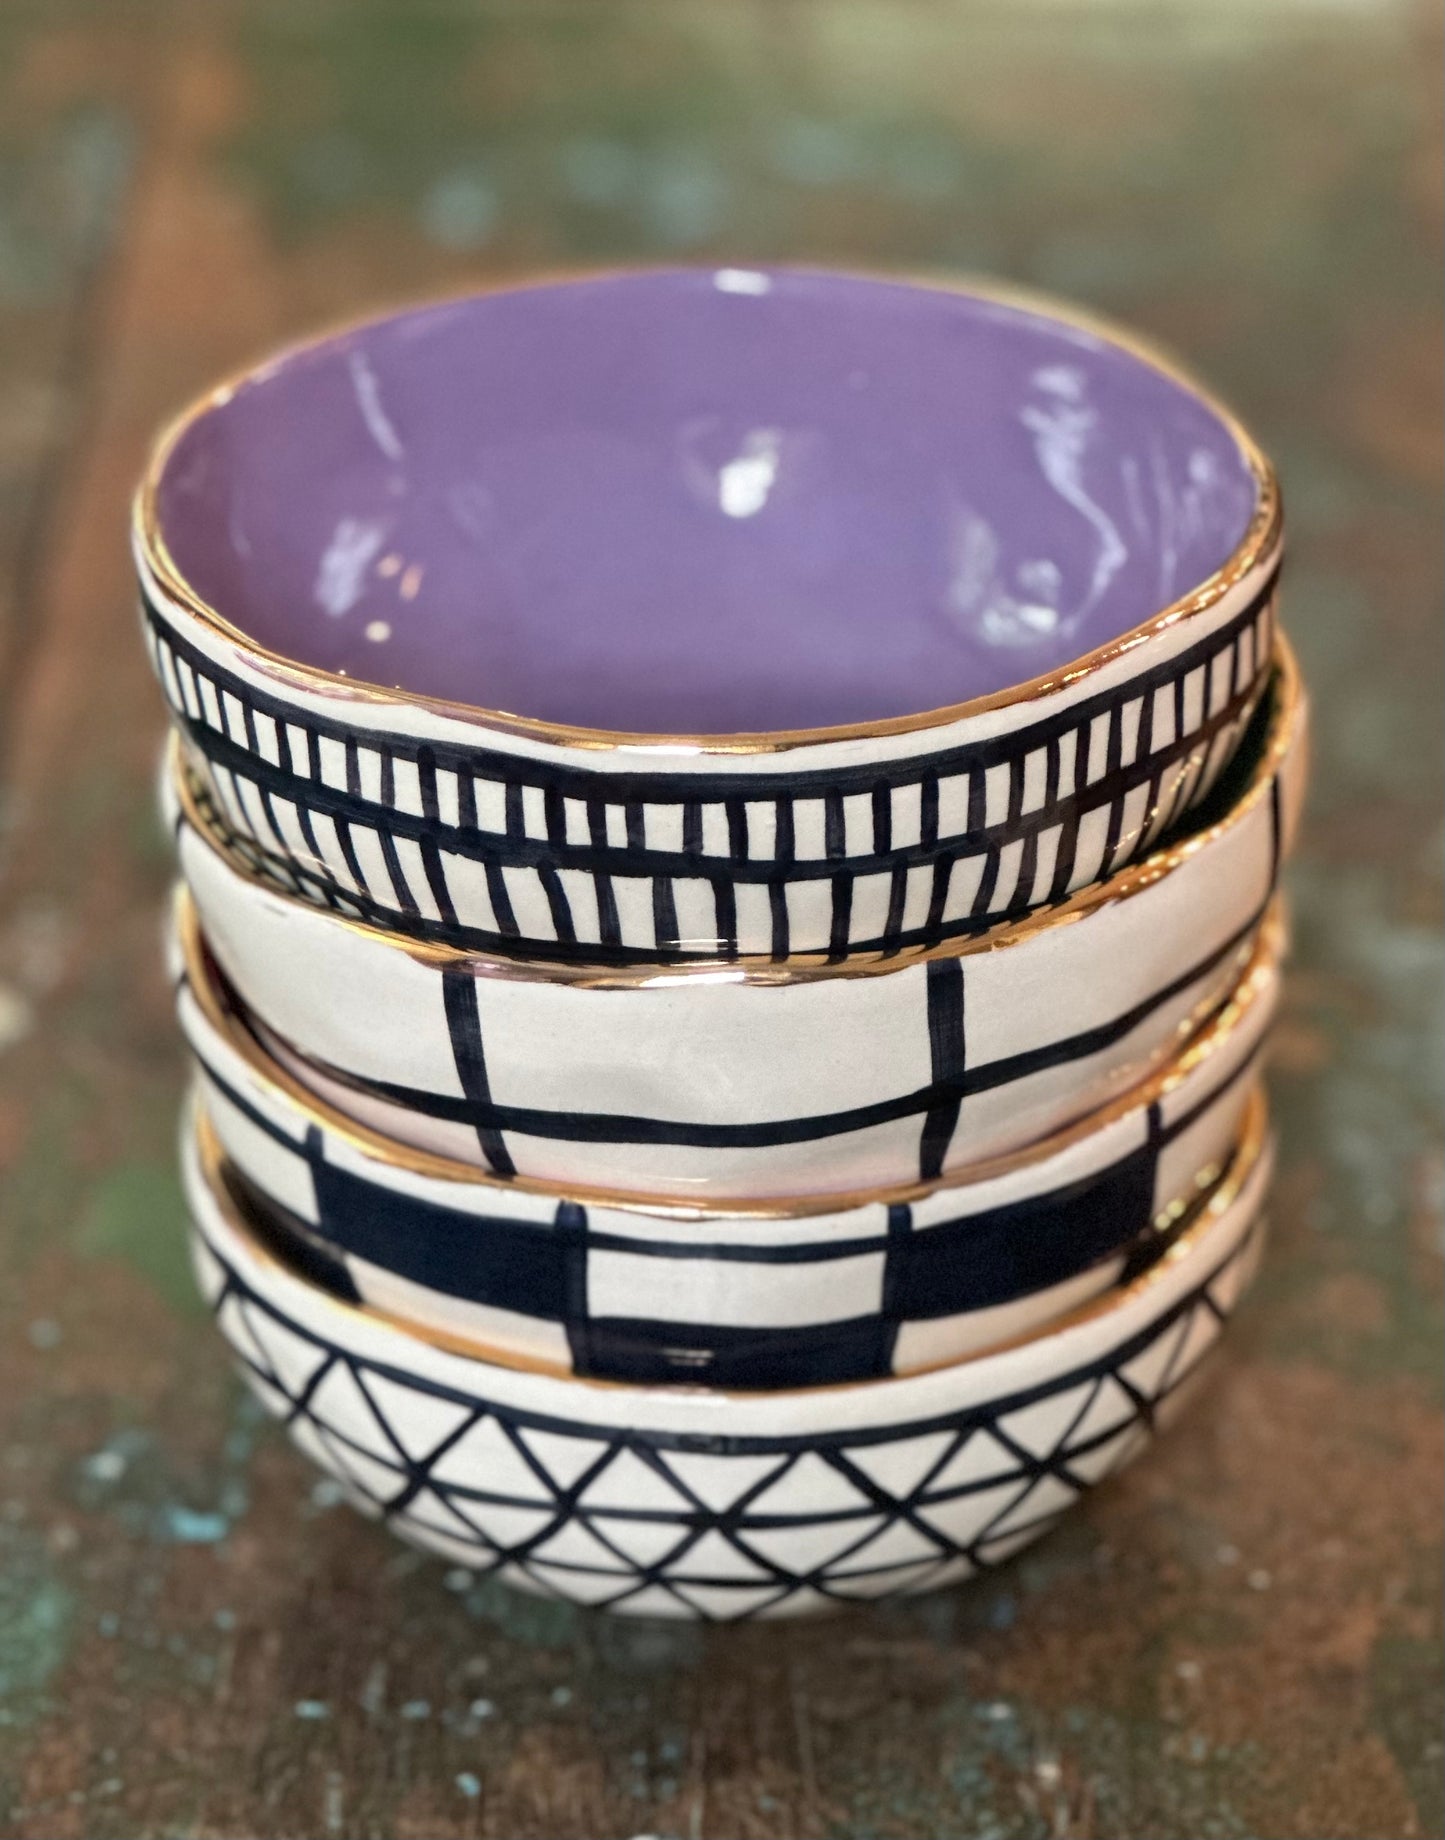 Purple Colorful bowl with gold rim